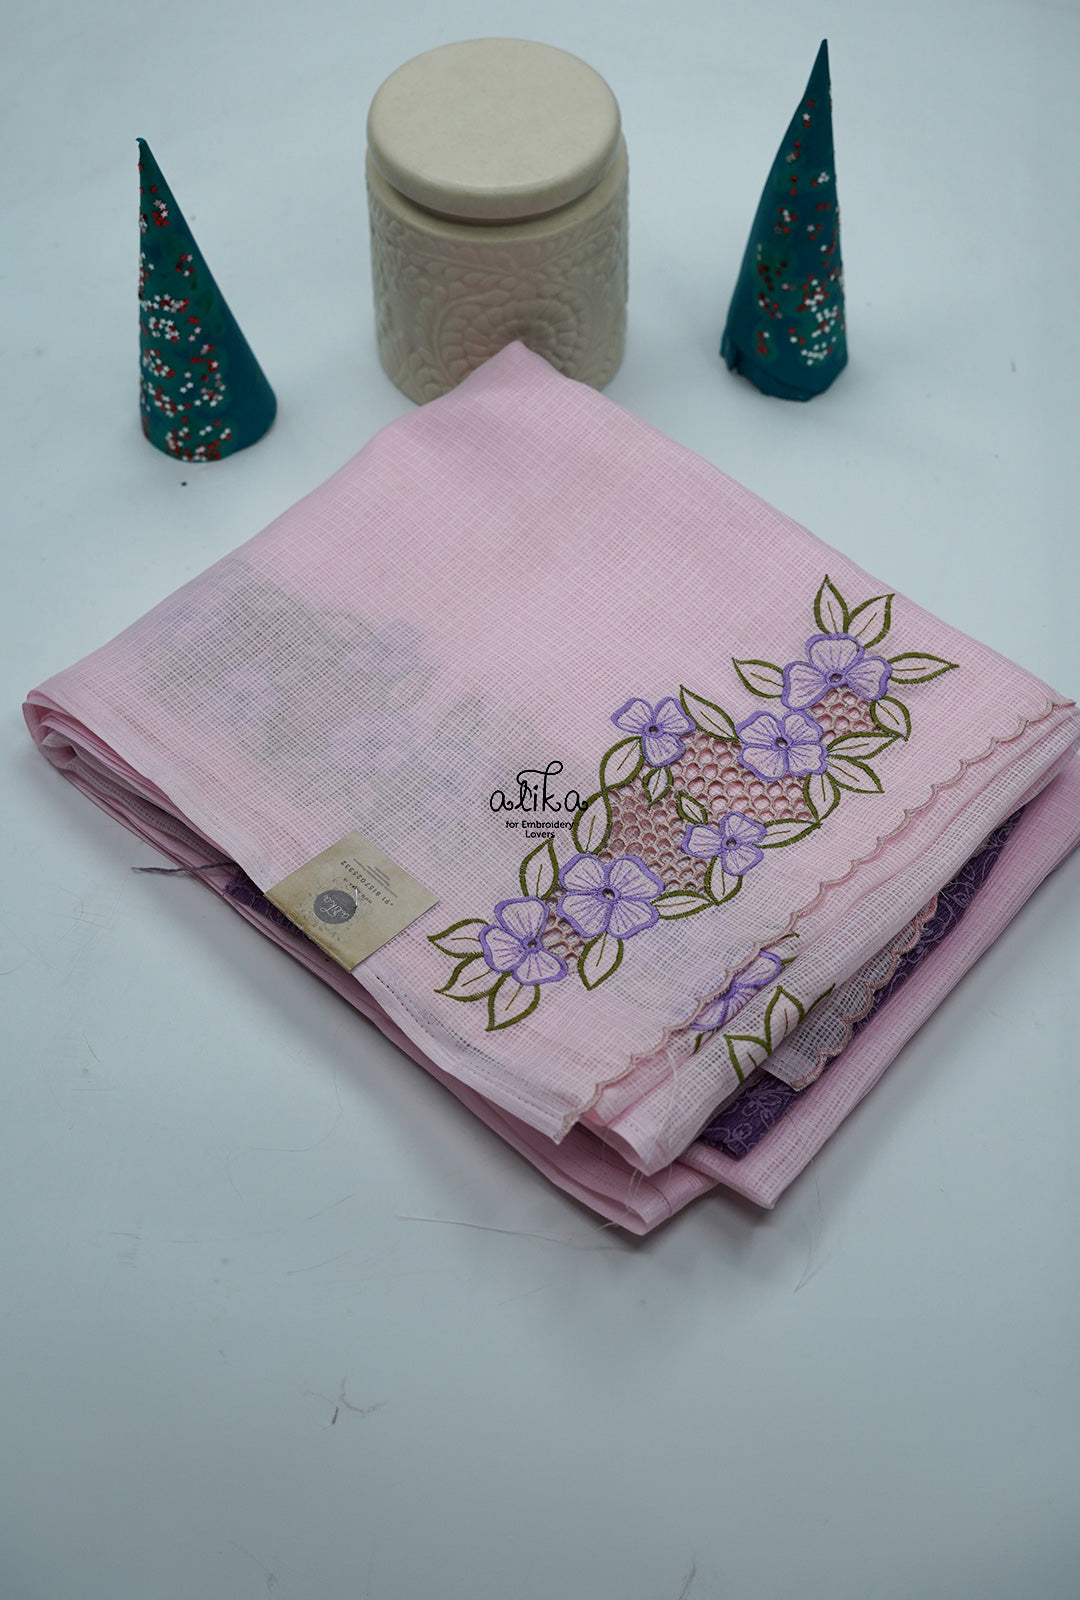 PINK CHECKED SILKY KOTA SAREE WITH CUTWORK  AND MACHINE  EMBROIDERY